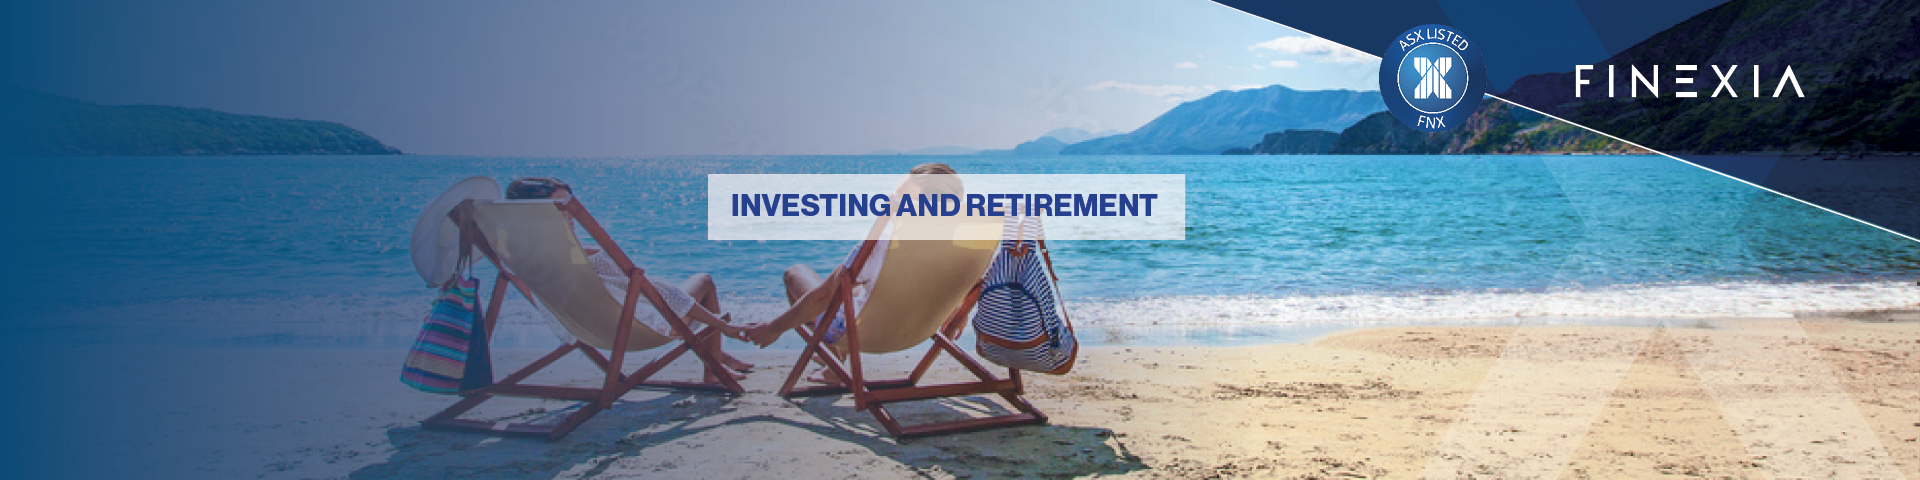 Investing and Retirement